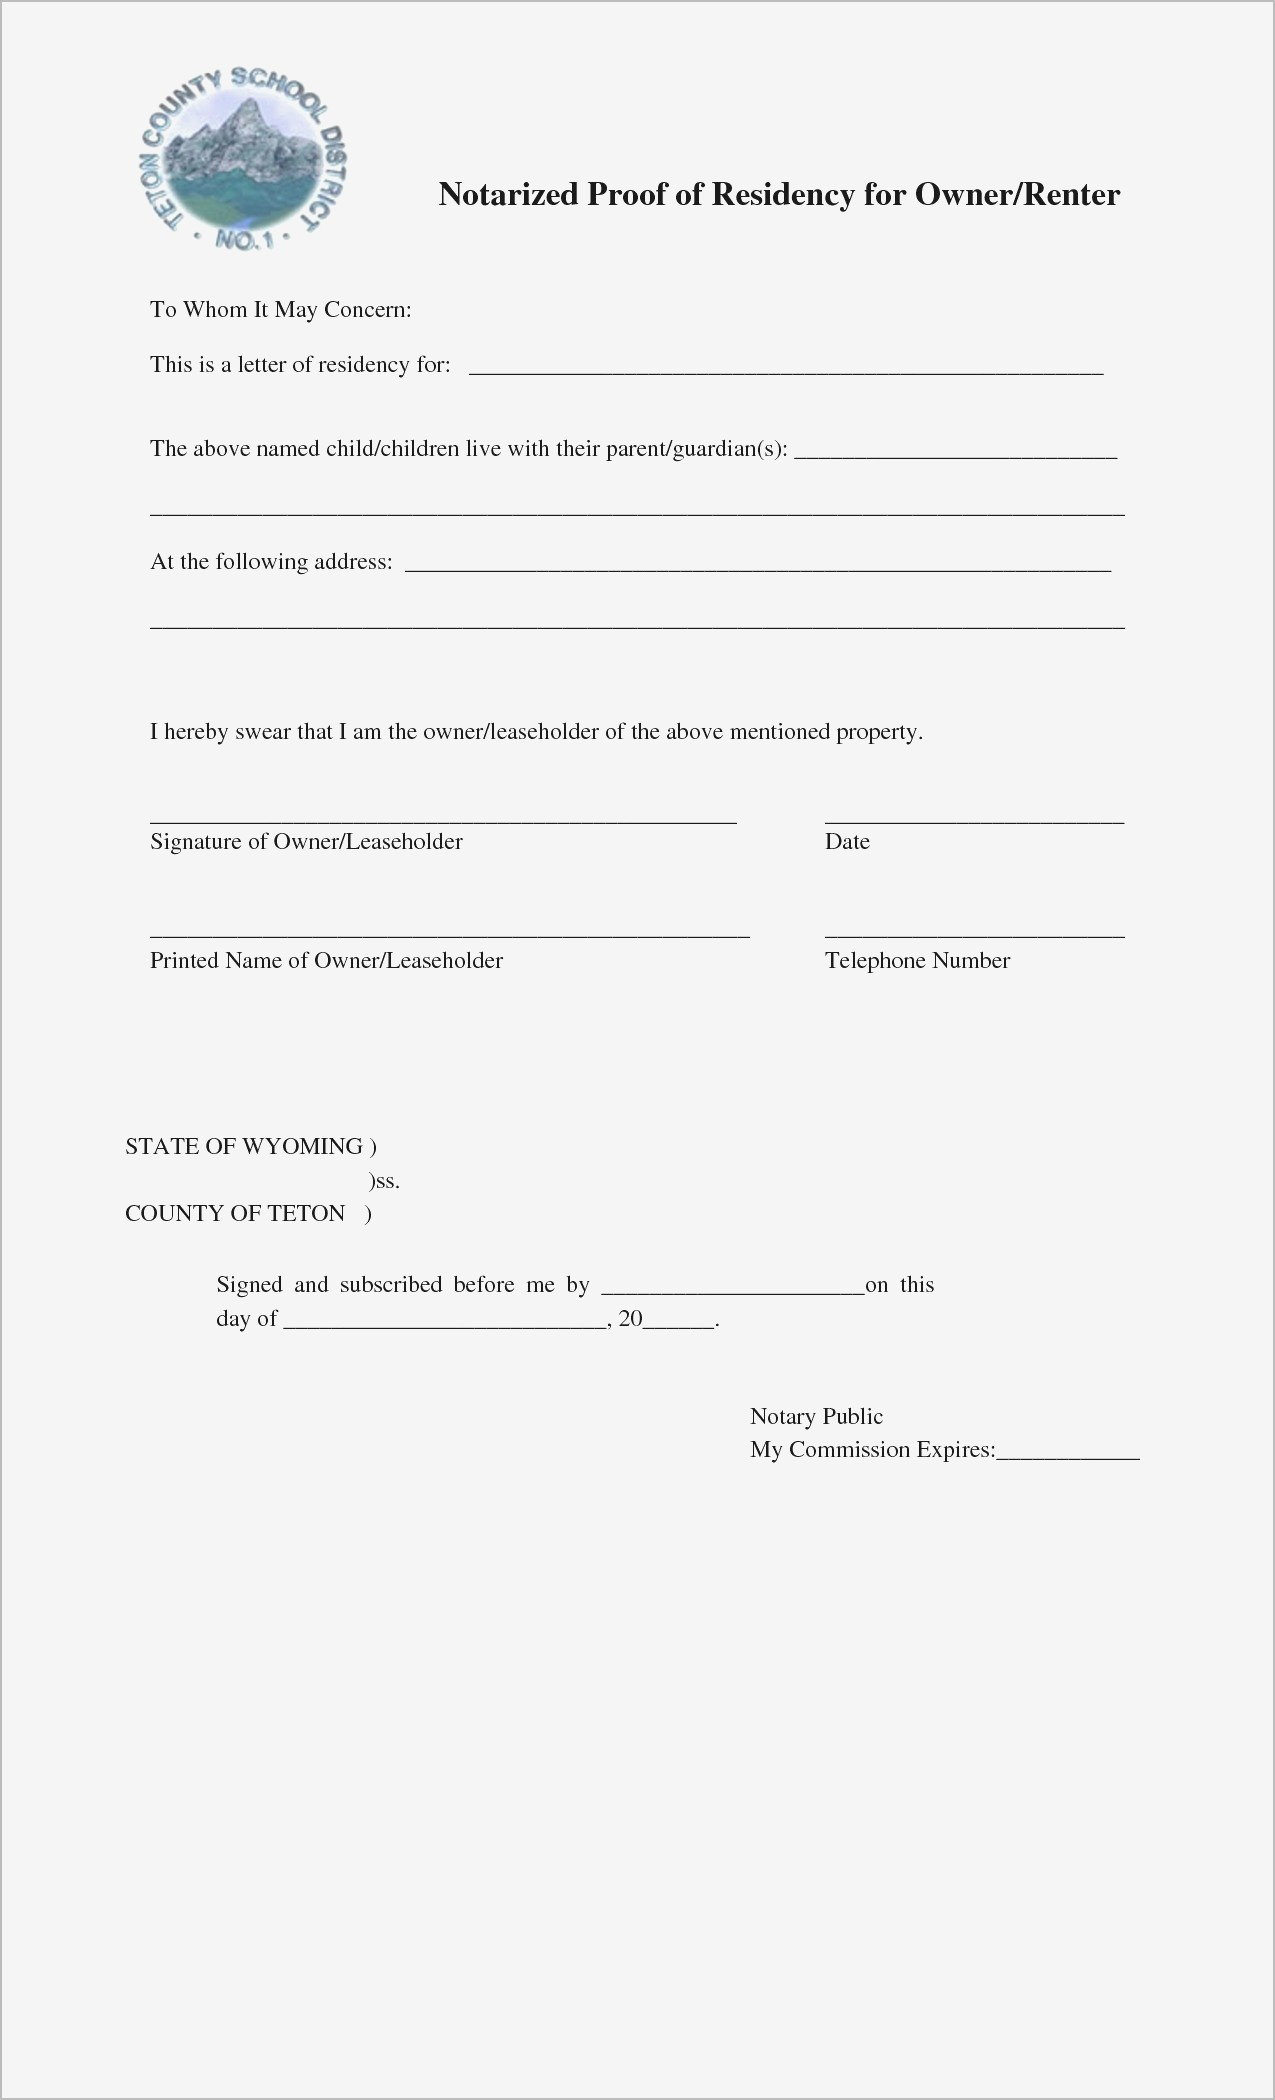 Proof Of Residency Notarized Letter Template